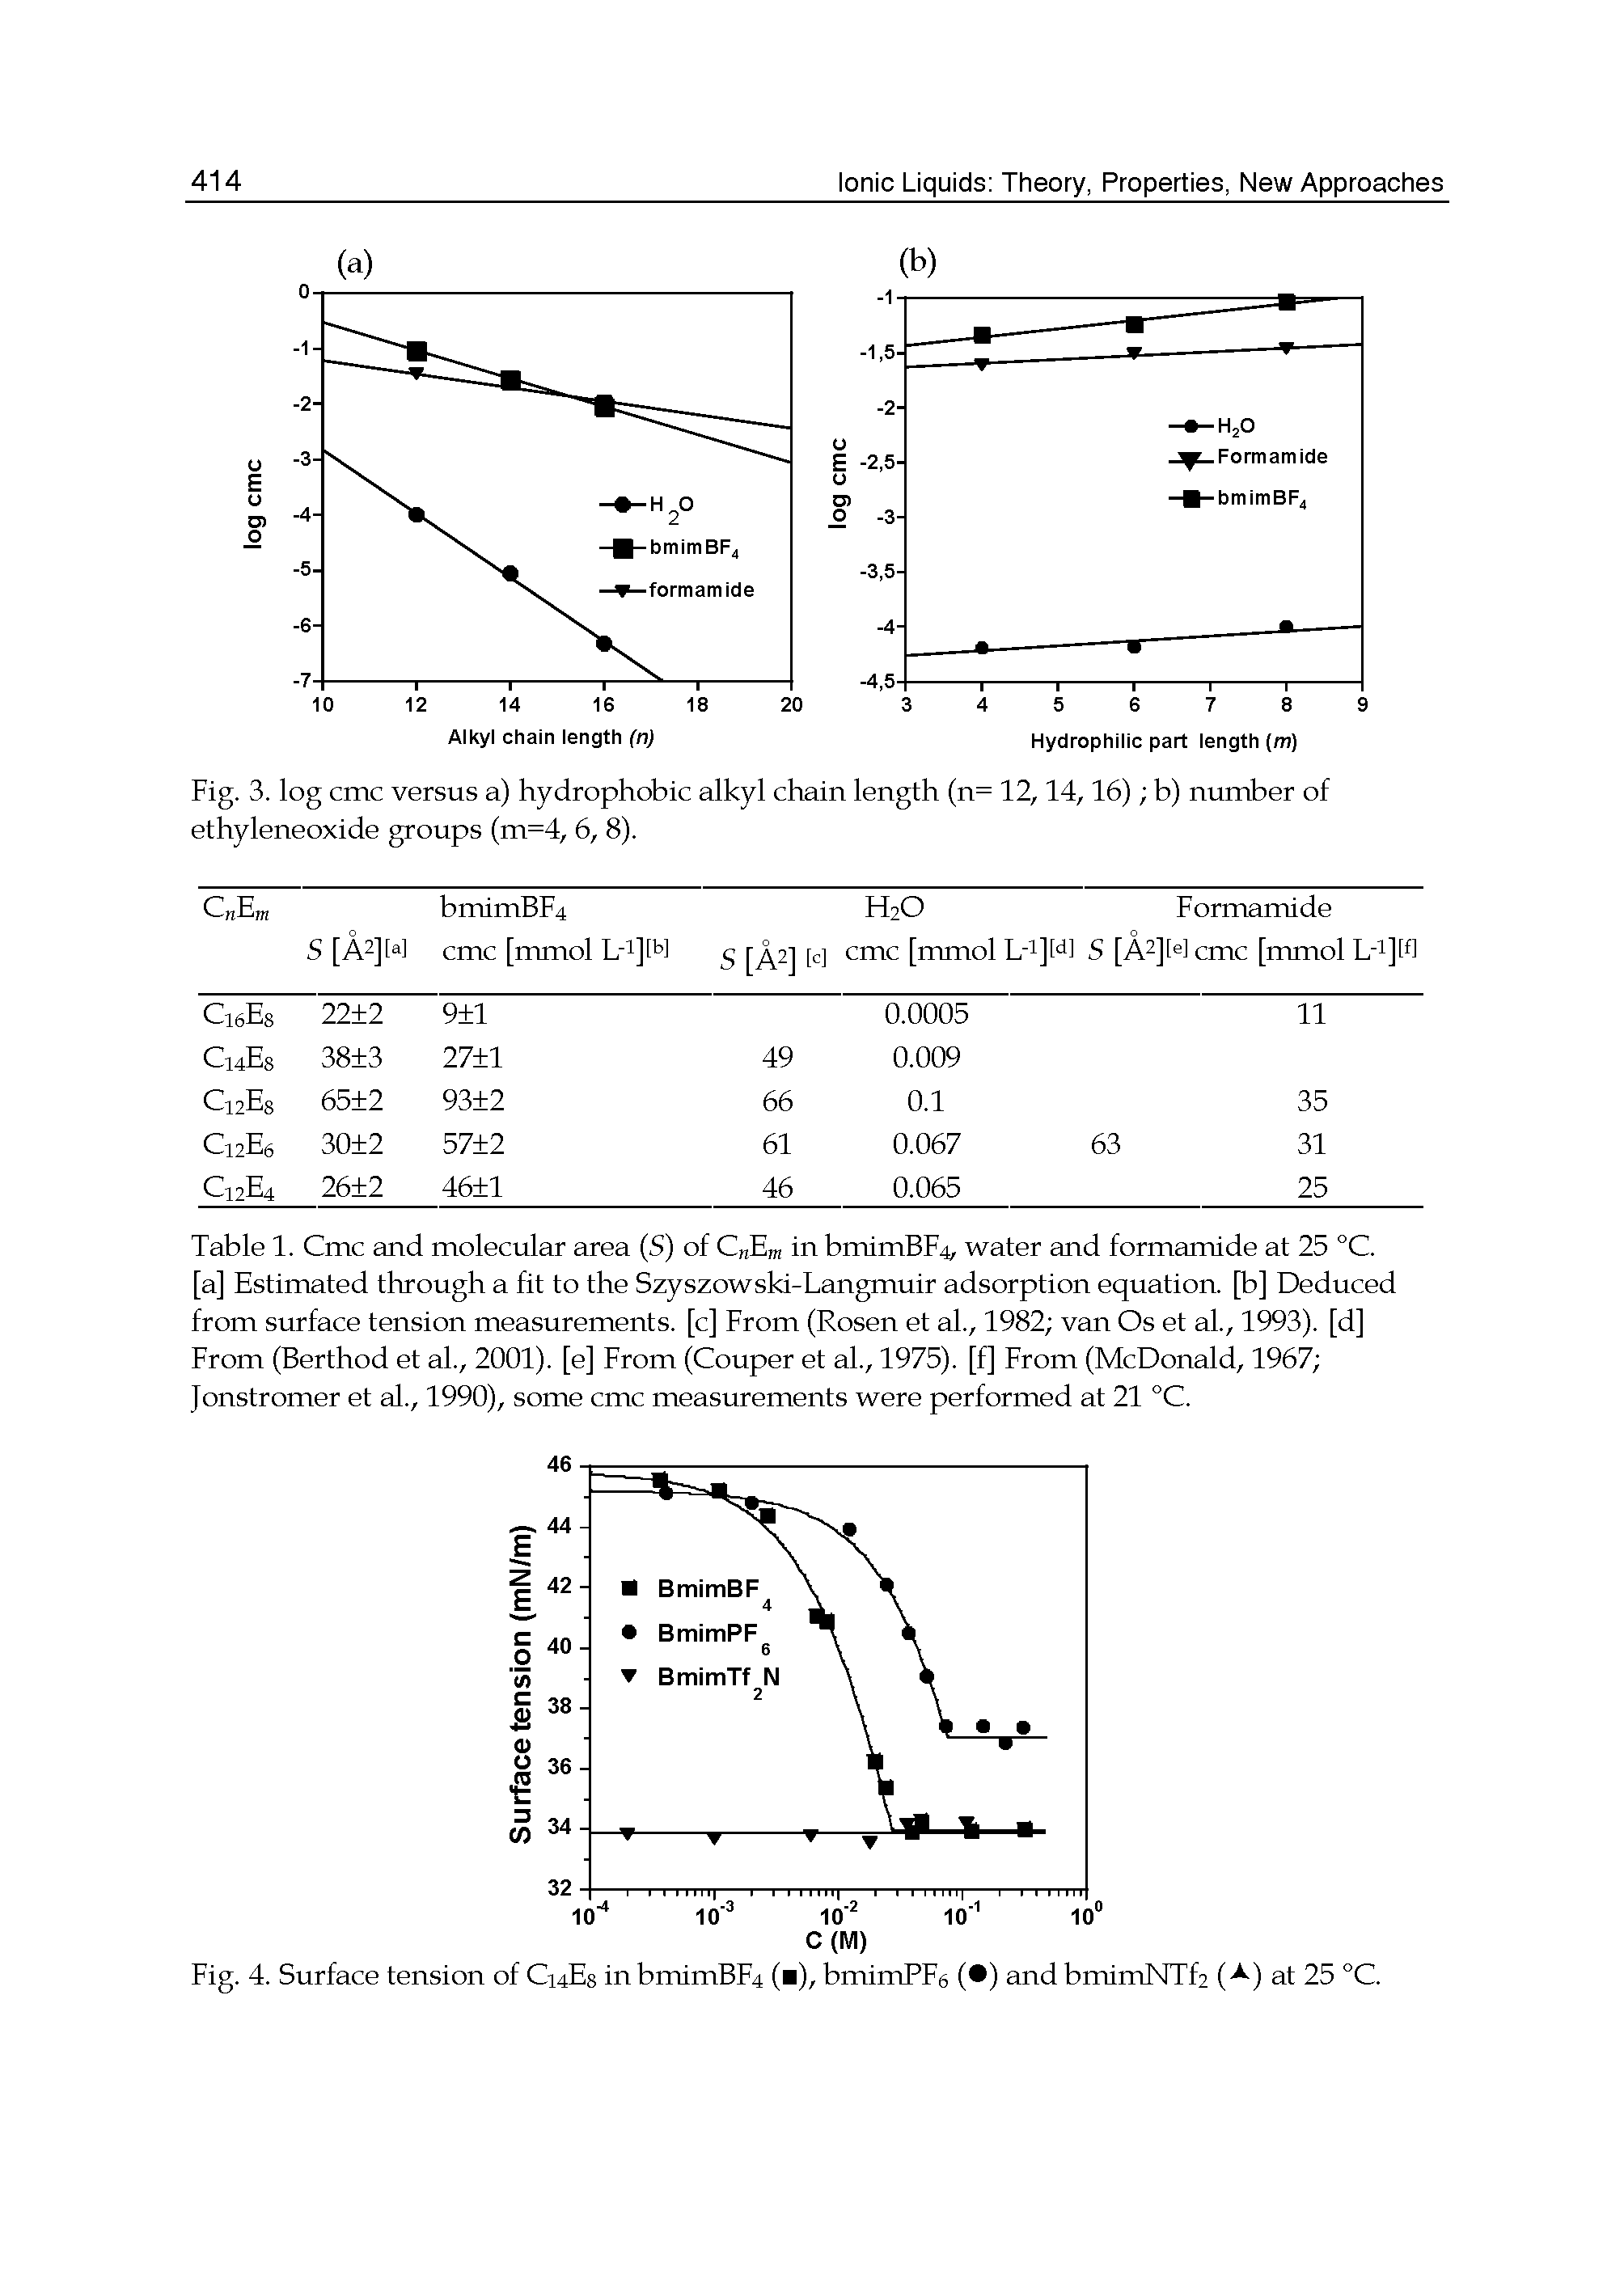 Table 1. Cmc and molecular area (S) of C Em in bmimBF4, water and formamide at 25 °C. [a] Estimated through a fit to the Szyszowski-Langmuir adsorption equation, [b] Deduced from surface tension measurements, [c] From (Rosen et al., 1982 van Os et al., 1993). [d] From (Berthod et al., 2001). [e] From (Couper et al., 1975). [f] From (McDonald, 1967 Jonstromer et al., 1990), some cmc measurements were performed at 21 °C.